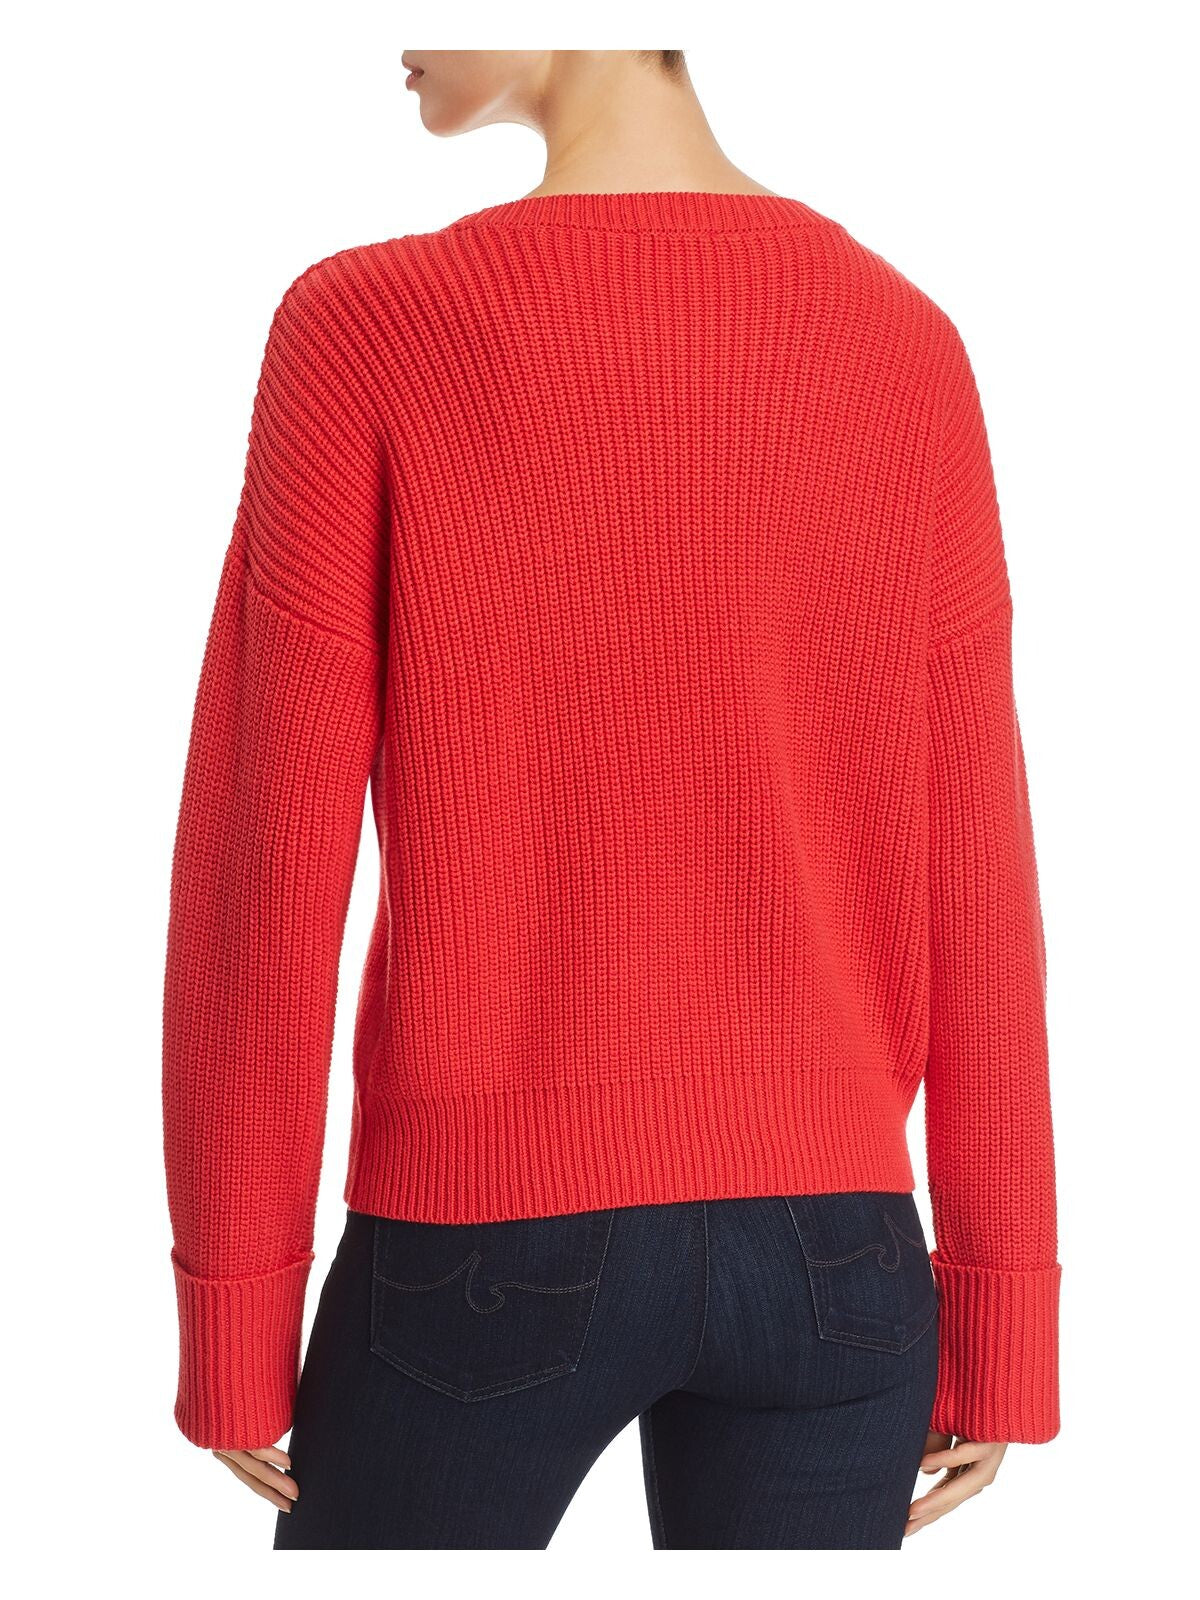 KENNETH COLE Womens Red Ribbed Cropped Drop Shoulder Roll Cuffs Long Sleeve Crew Neck Sweater XXS